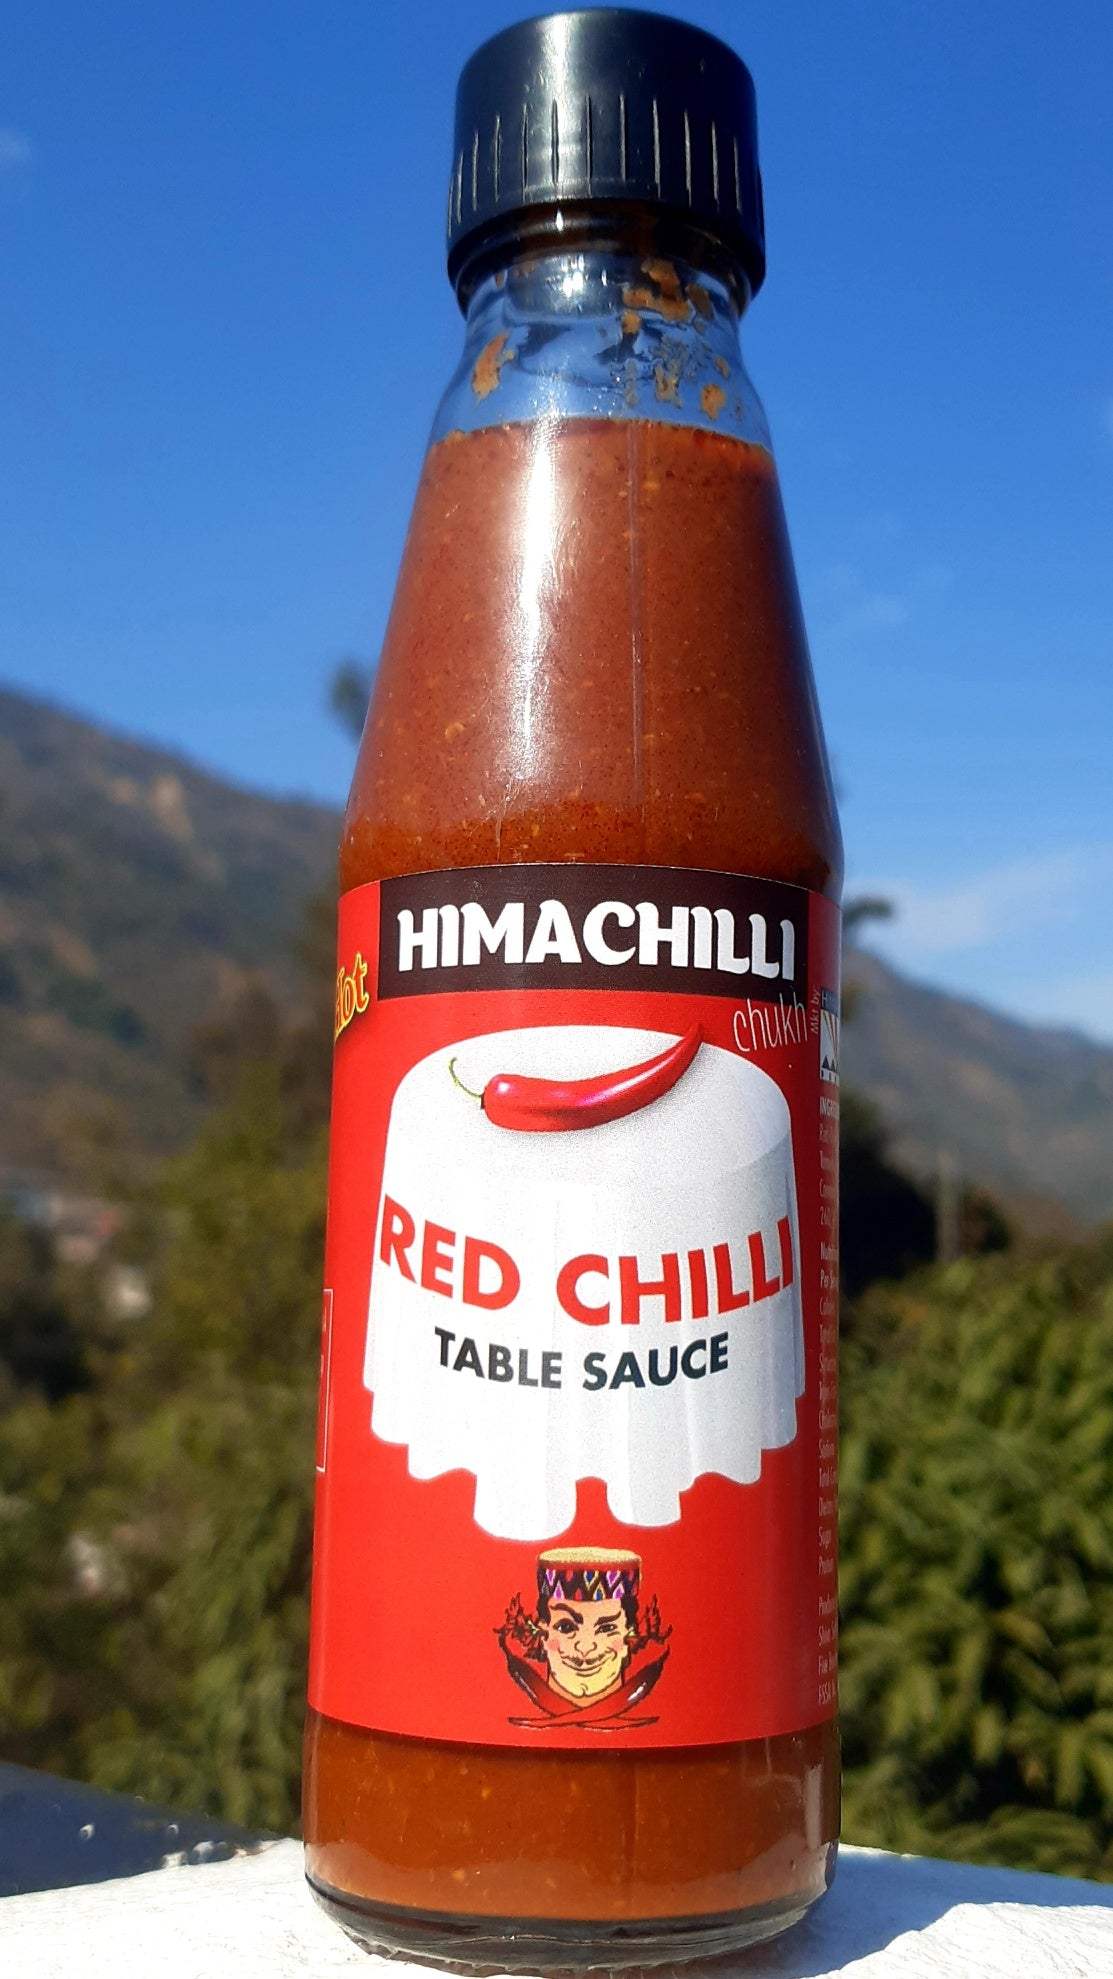 Himachilli. Red Chilli Sauce. Hot Sauce, Indian Spices, Smokey Chilli Sauce